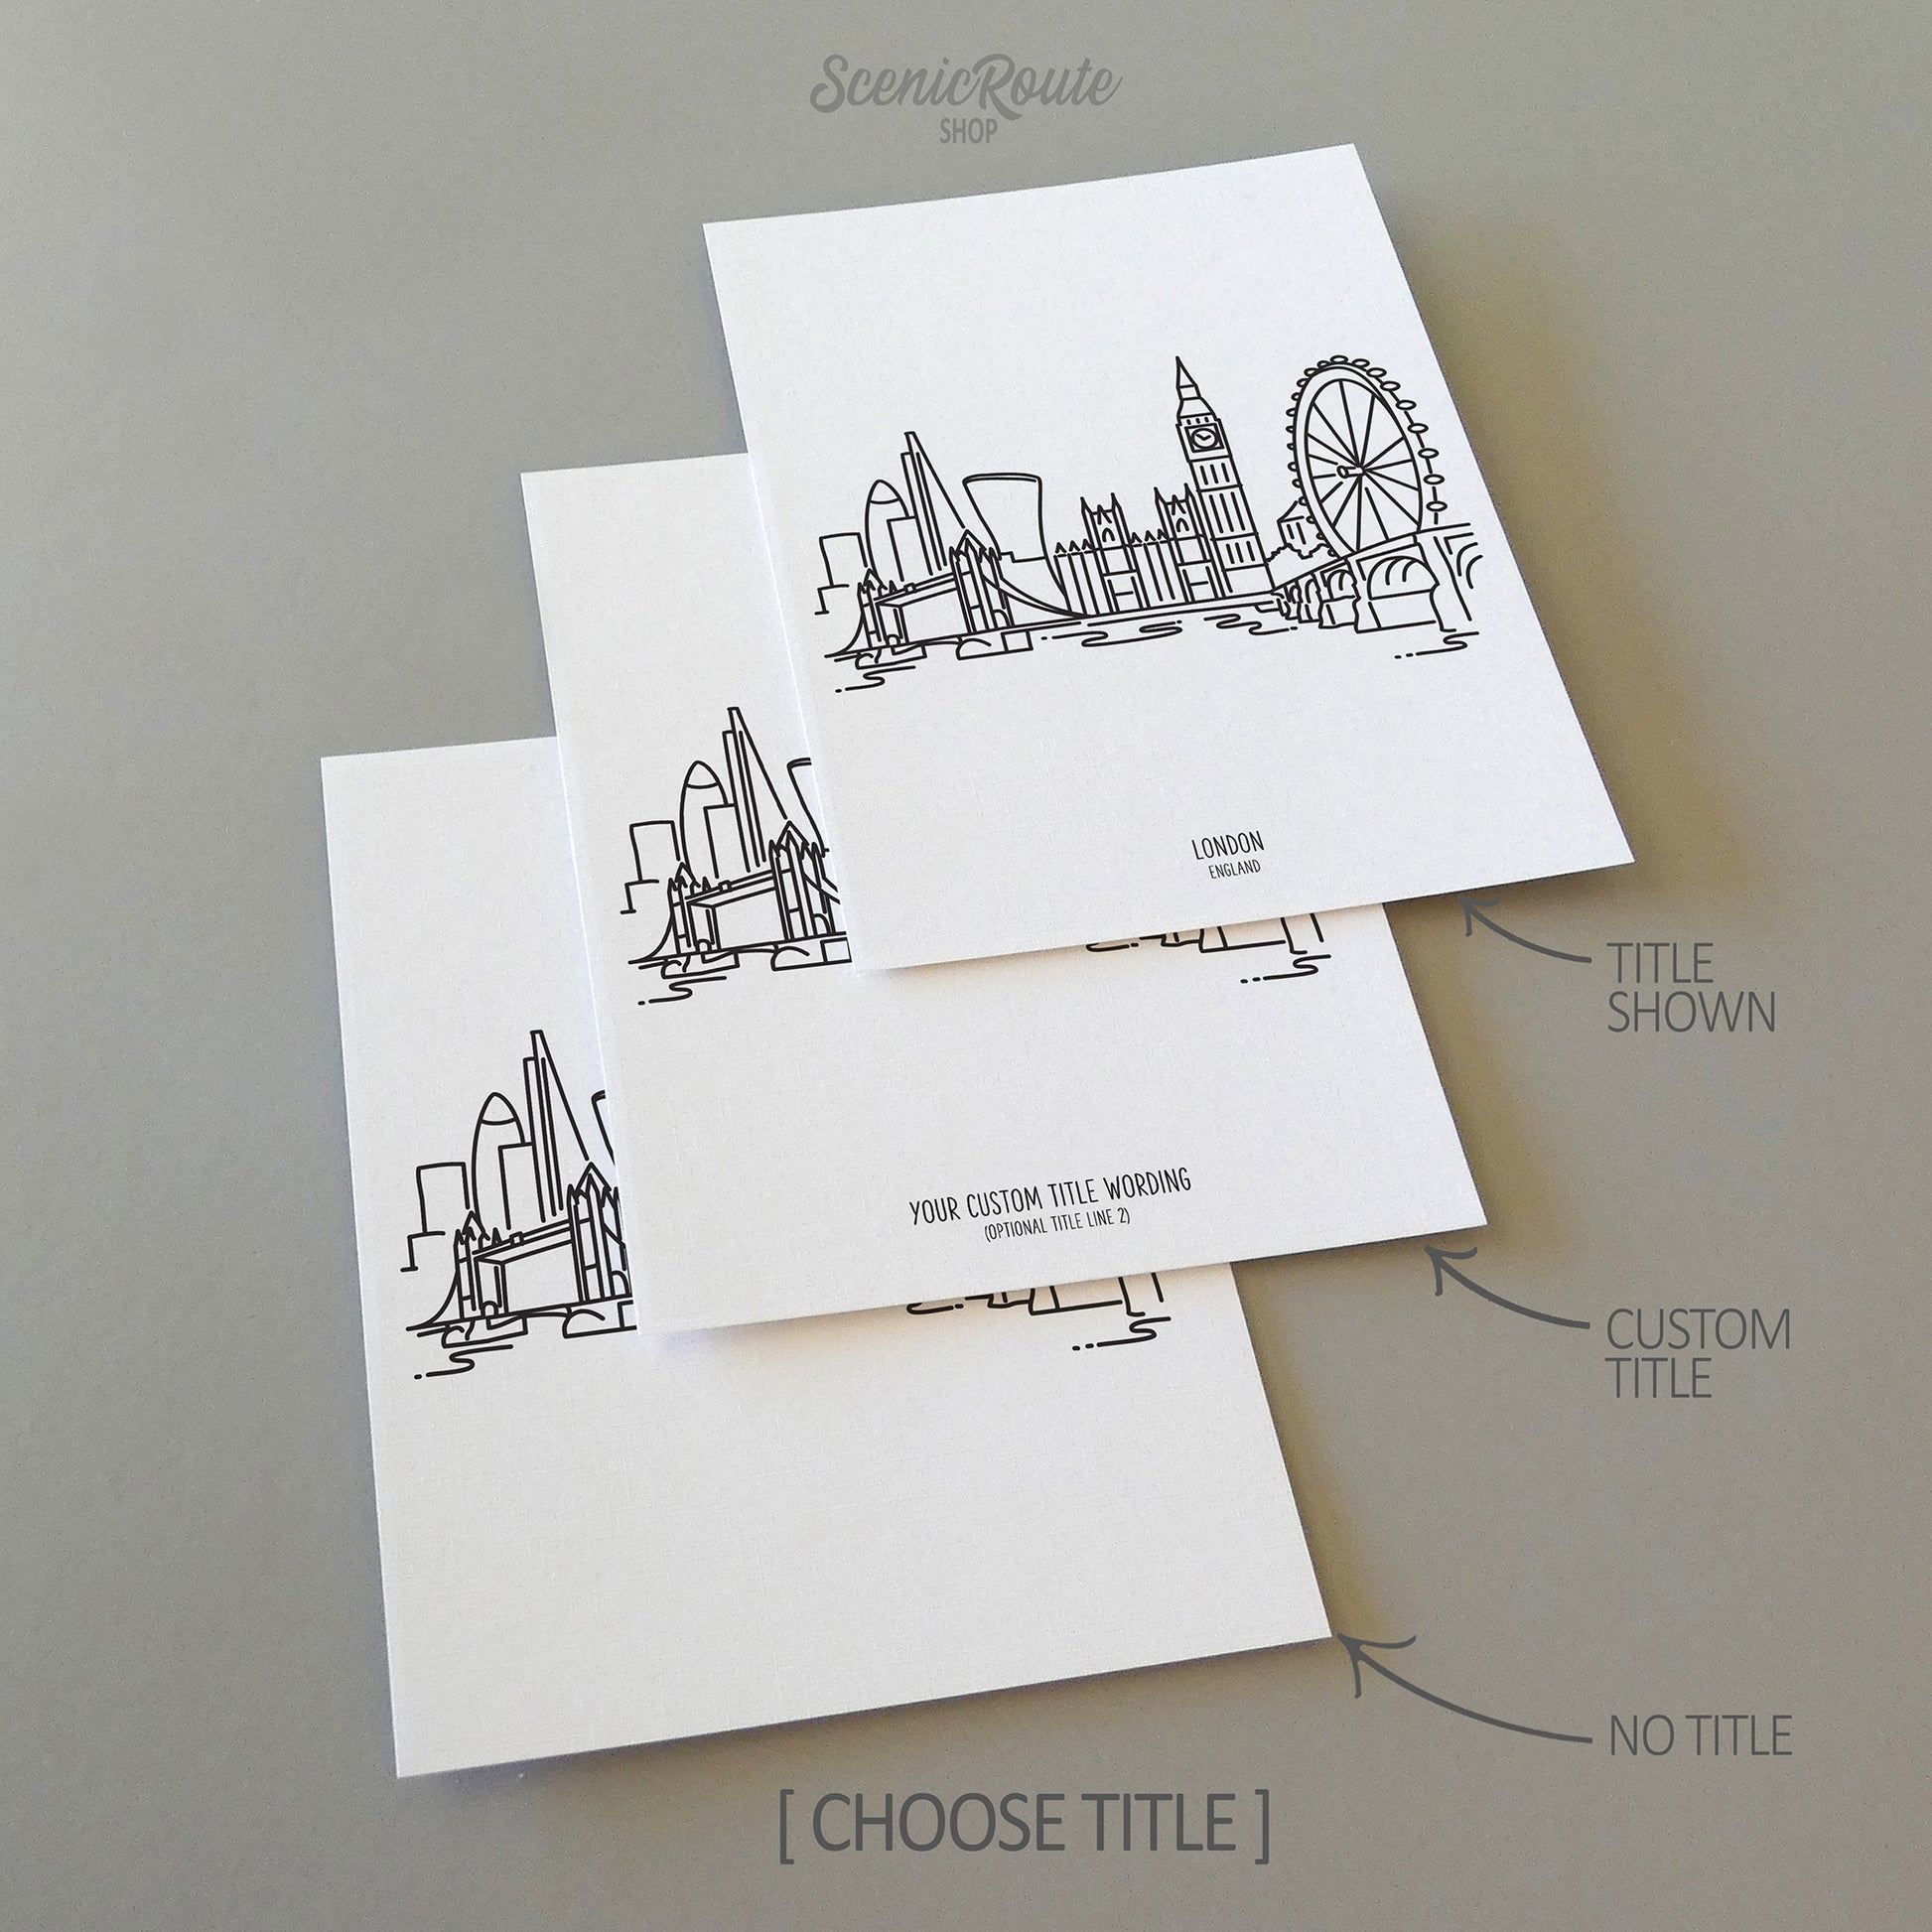 Three line art drawings of the London England Skyline on white linen paper with a gray background. The pieces are shown with title options that can be chosen and personalized.